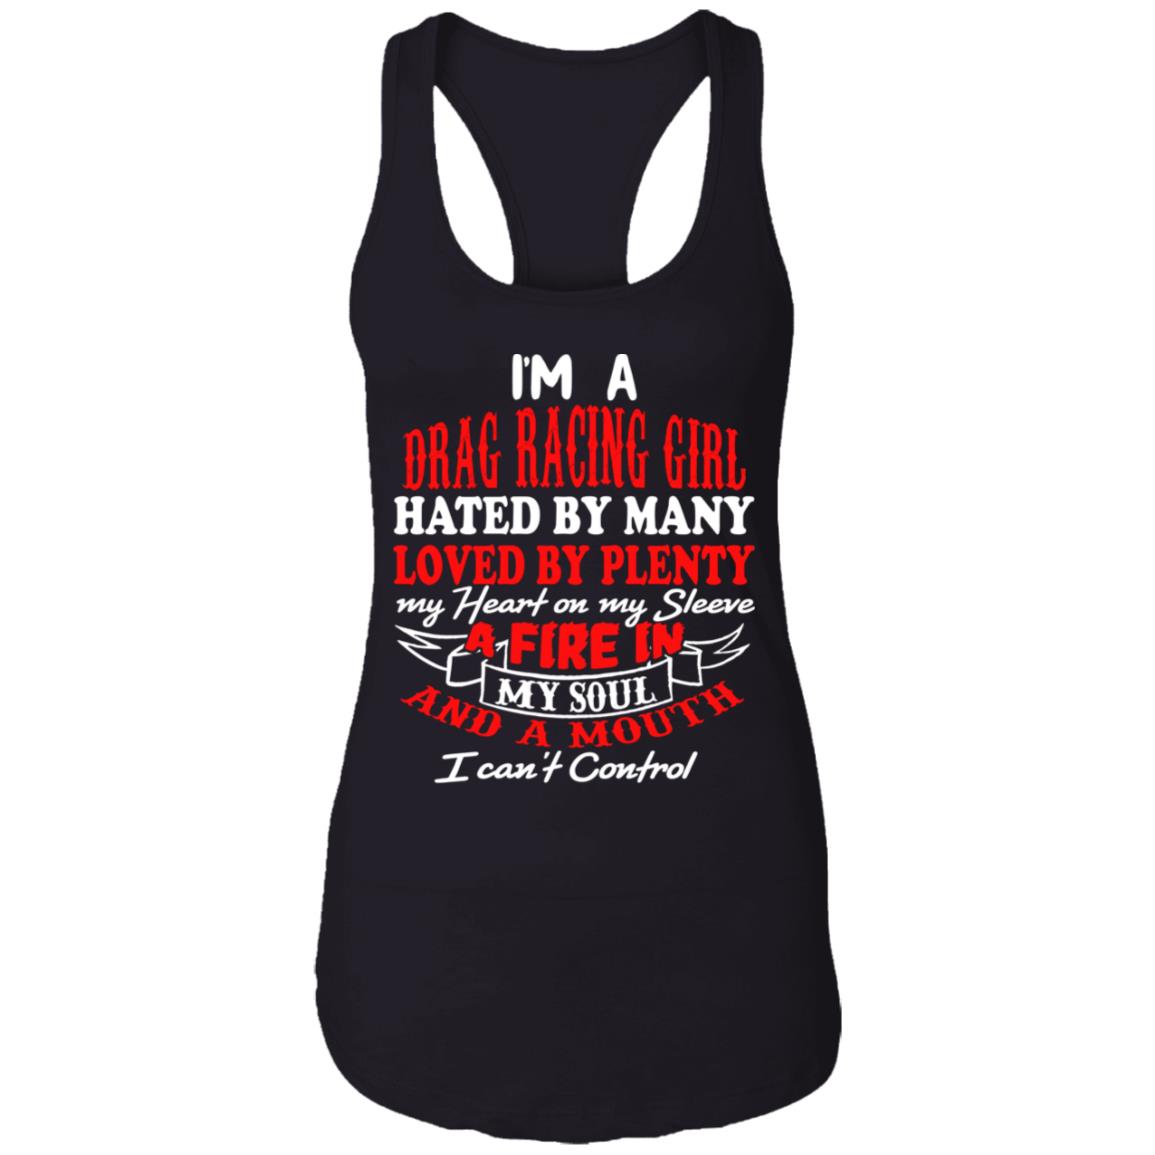 I'm A Drag Racing Girl Hated By Many Loved By Plenty Ladies Ideal Racerback Tank